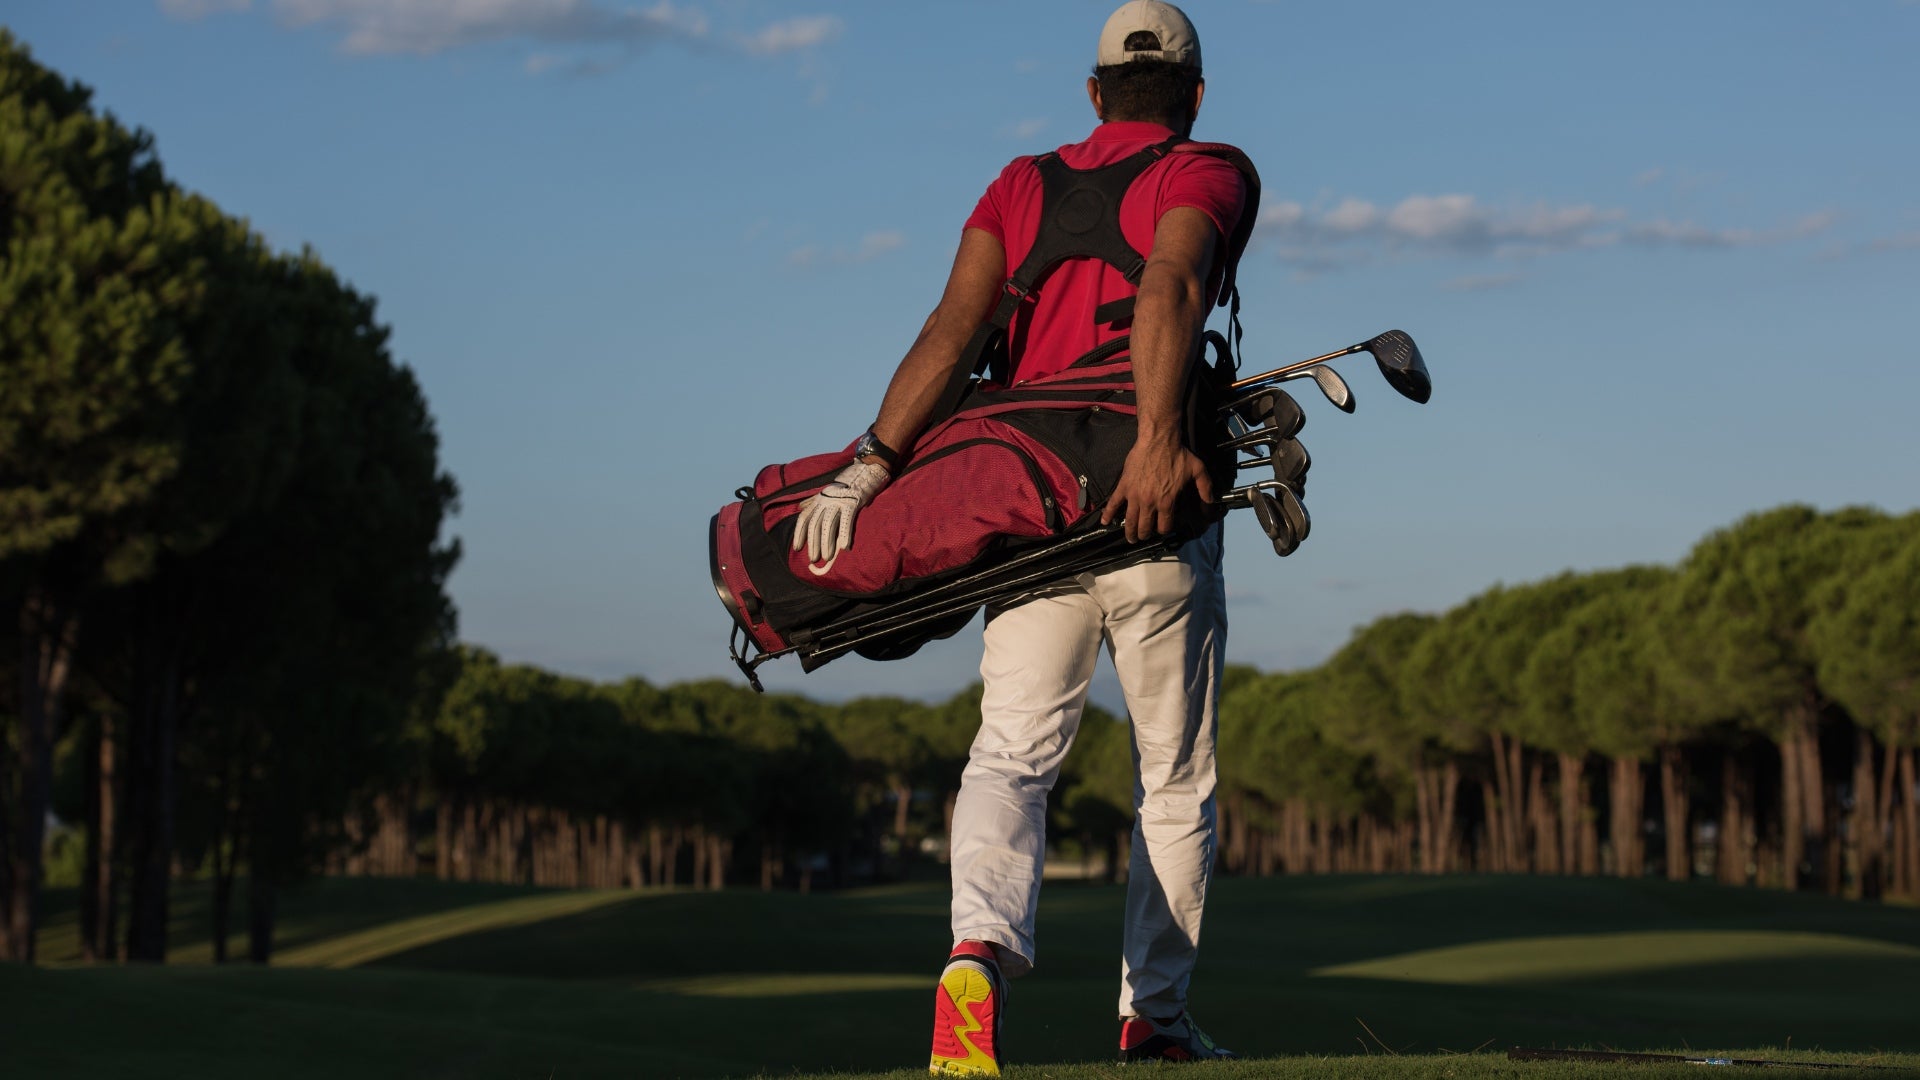 Experience organization, comfort, and style with our innovative golf products.